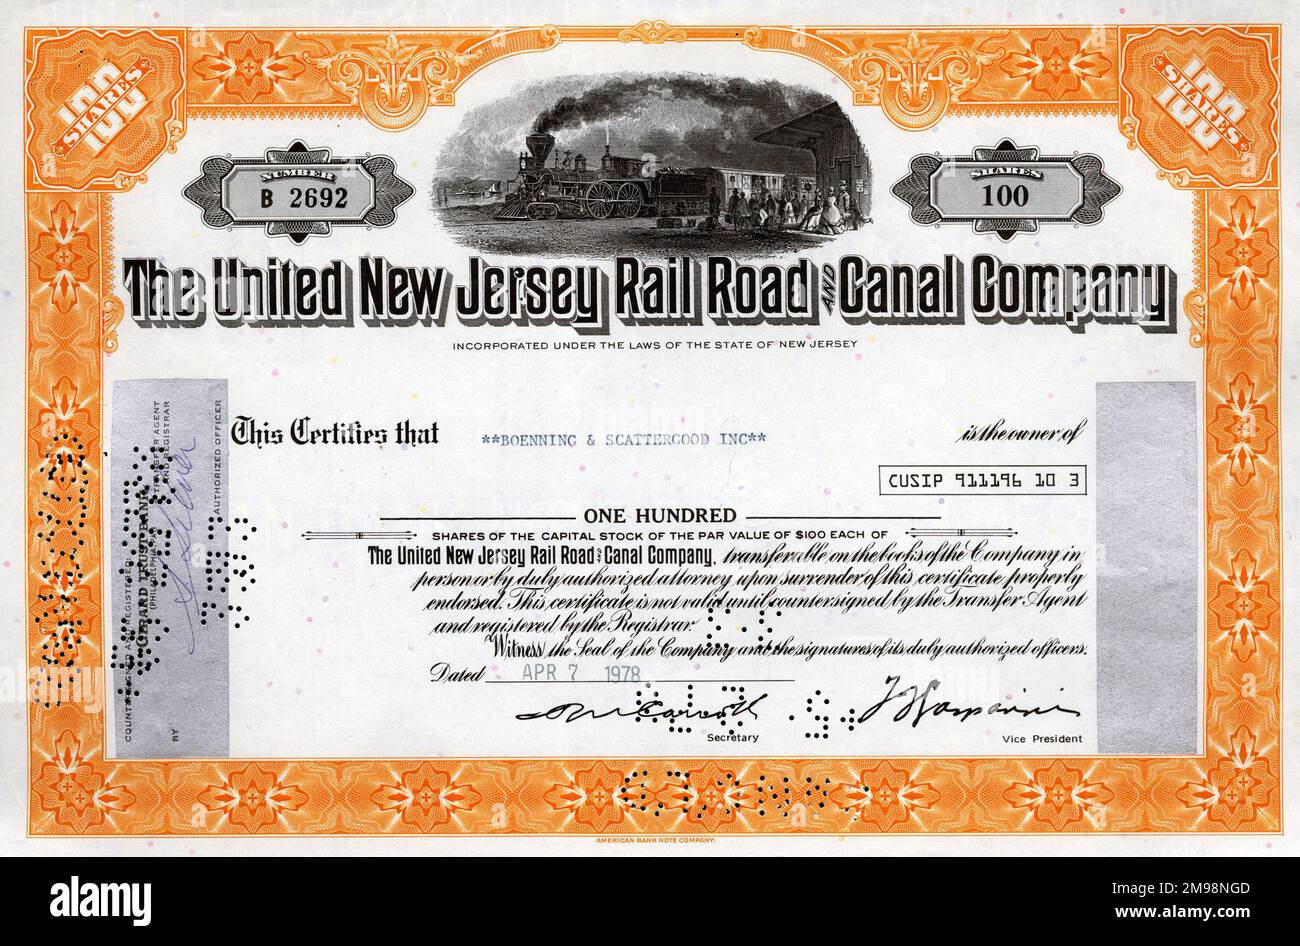 Aktienzertifikat - The United New Jersey Rail Road and Canal Company, 100 Aktien. Stockfoto